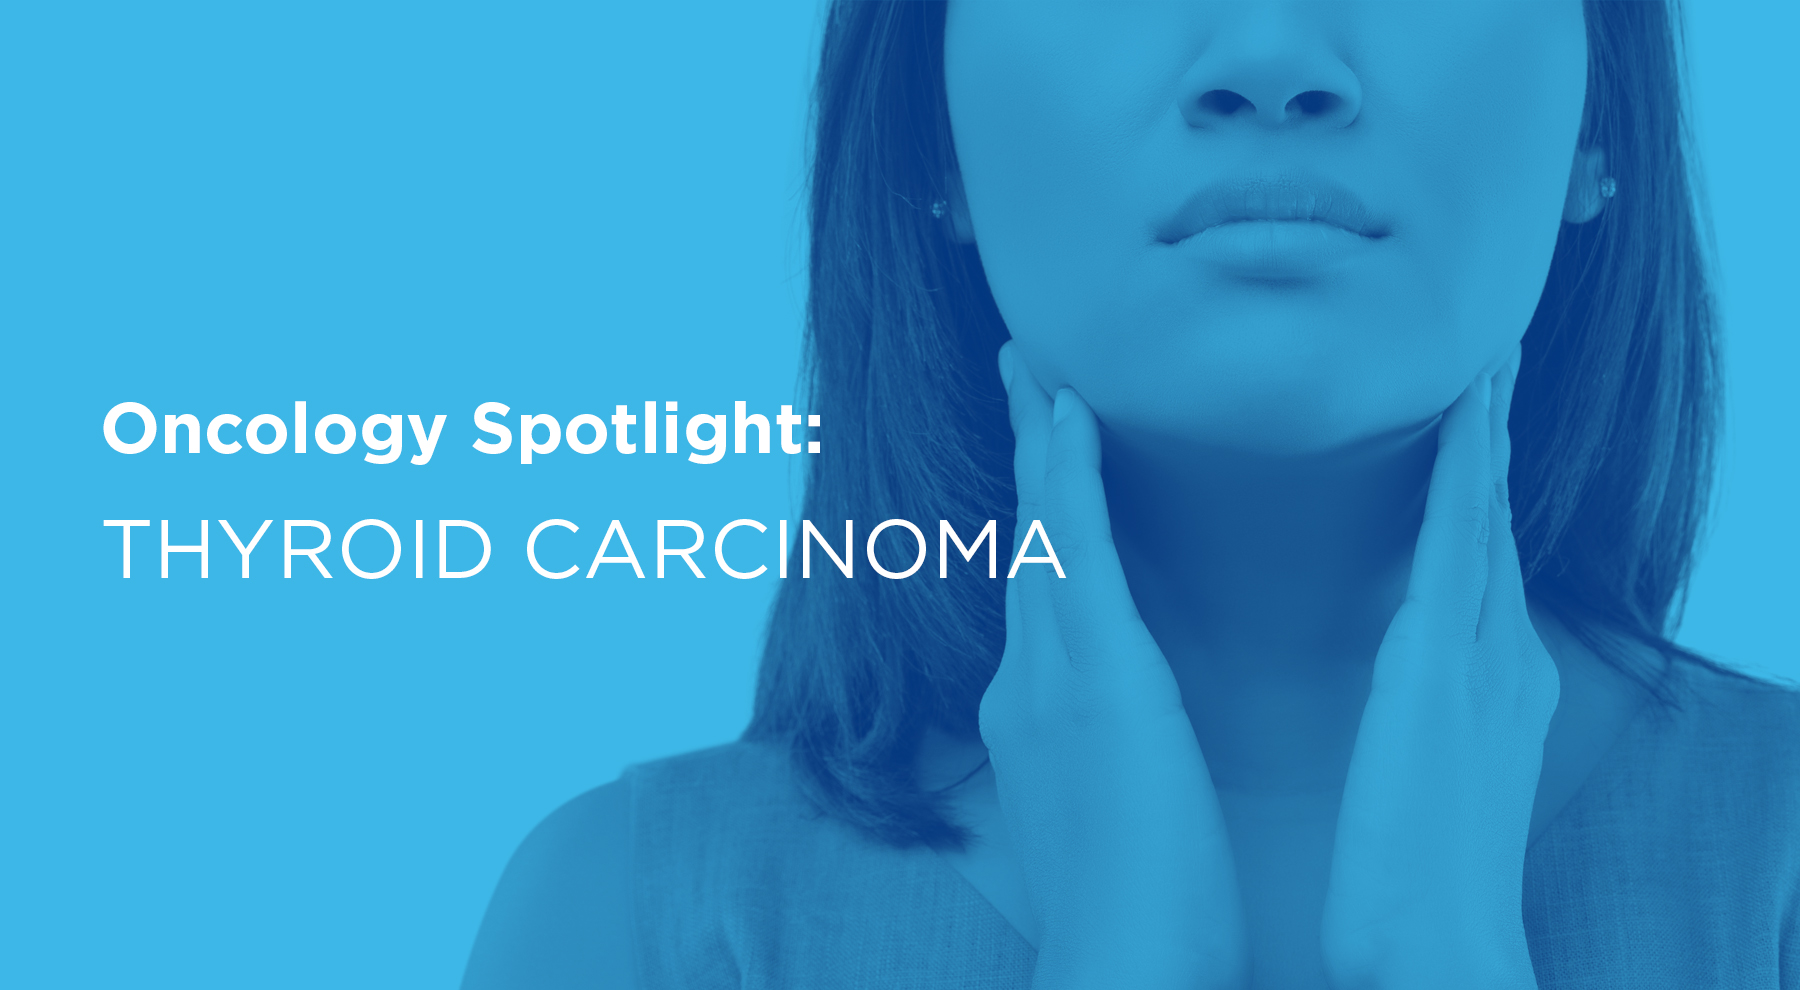 Image of patient touching their neck. Overlayed text says Oncology Spotlight: Thyroid Carinoma.